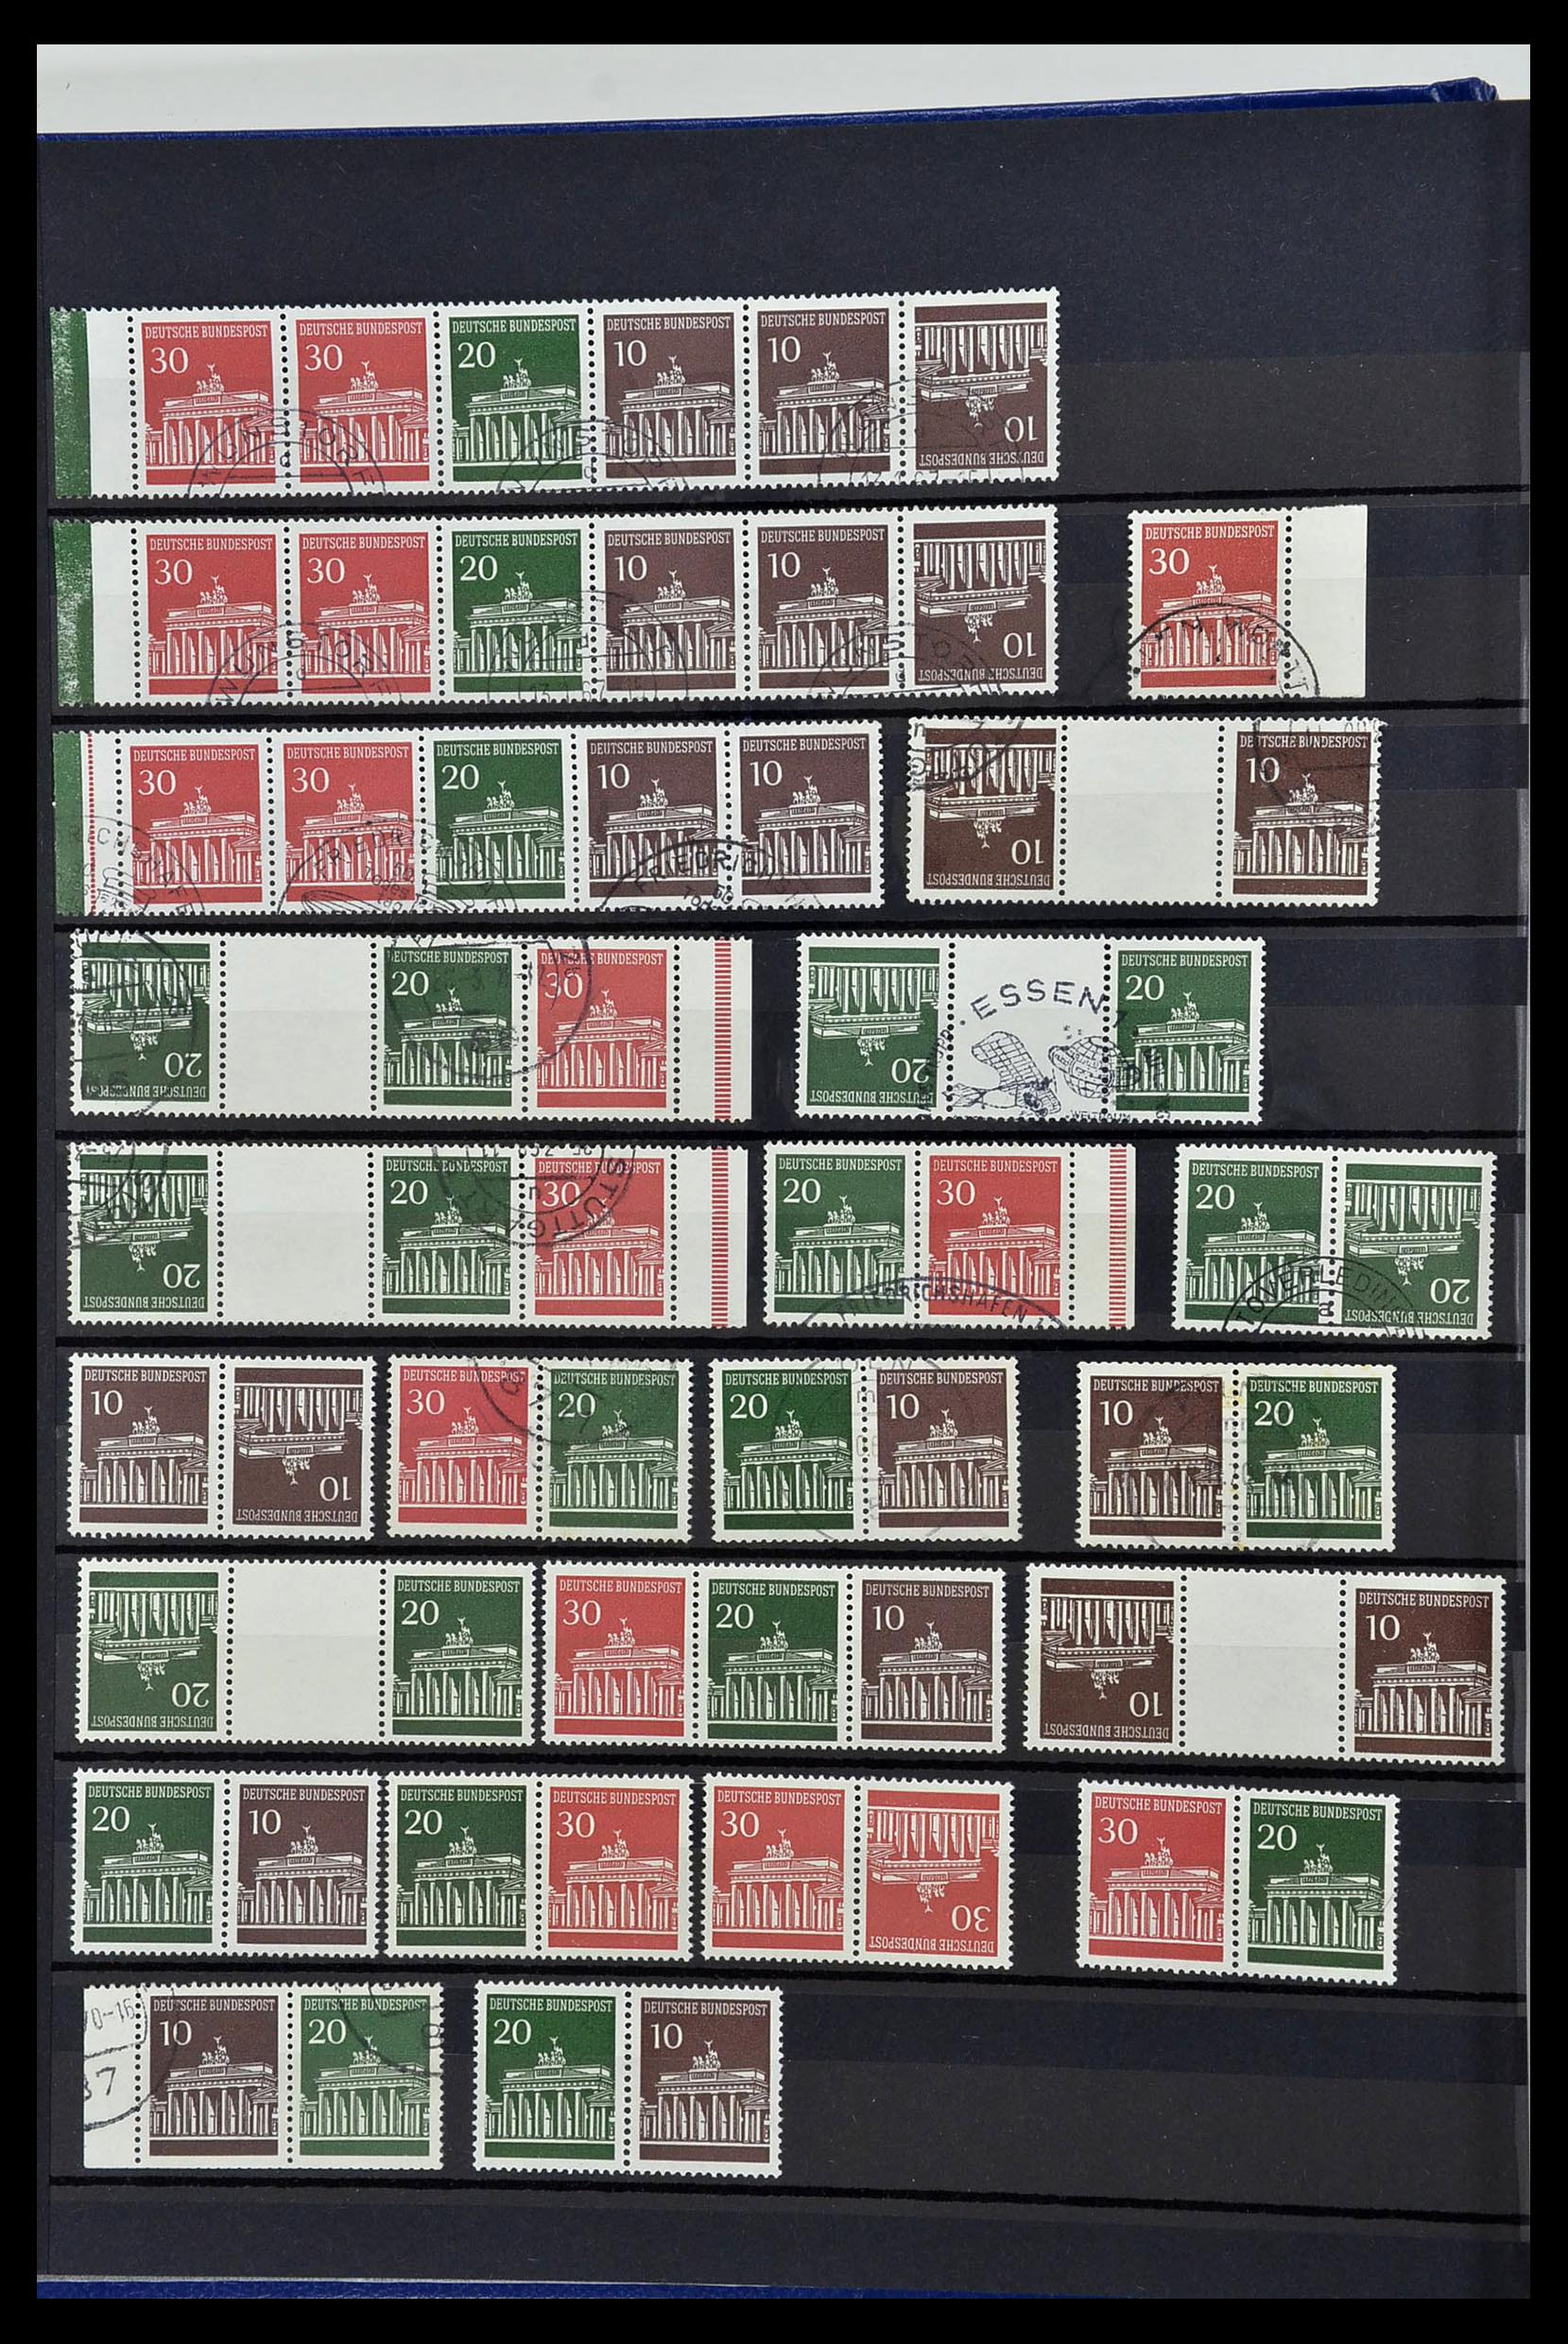 34003 012 - Stamp collection 34003 Bundespost combinations 1950-2020.